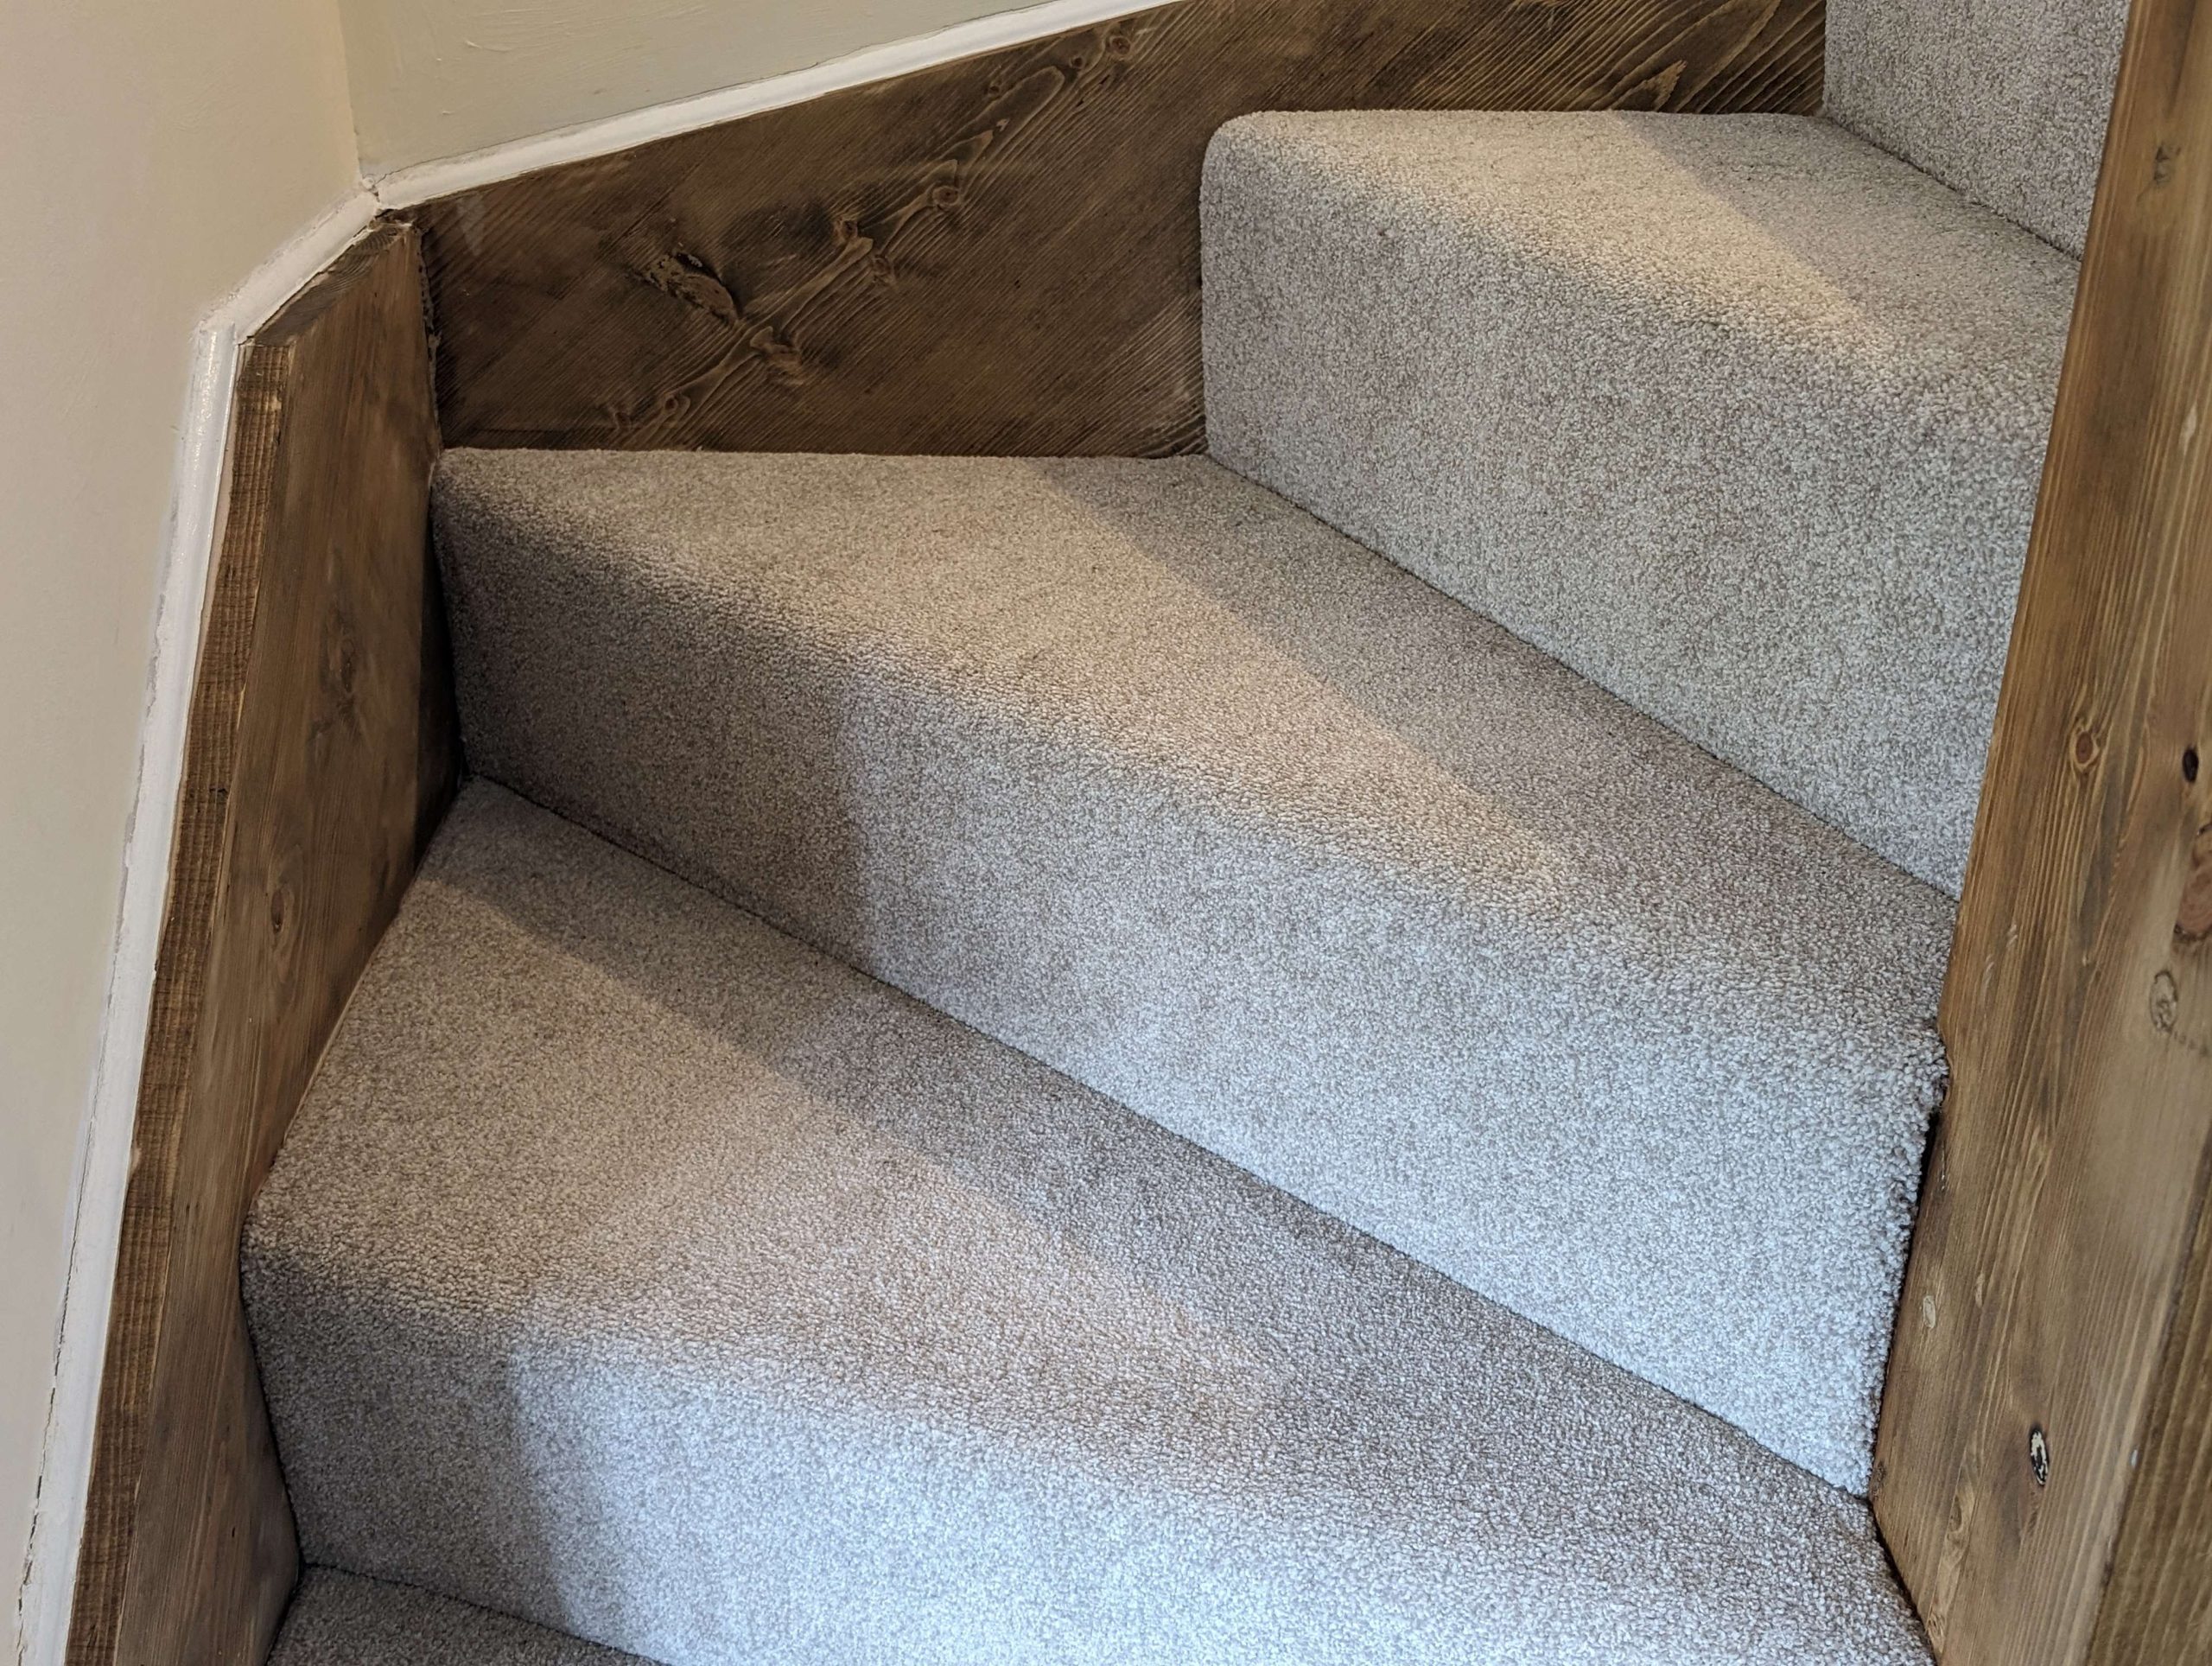 How to Fit Carpet on Stair Winders, Edge to Edge